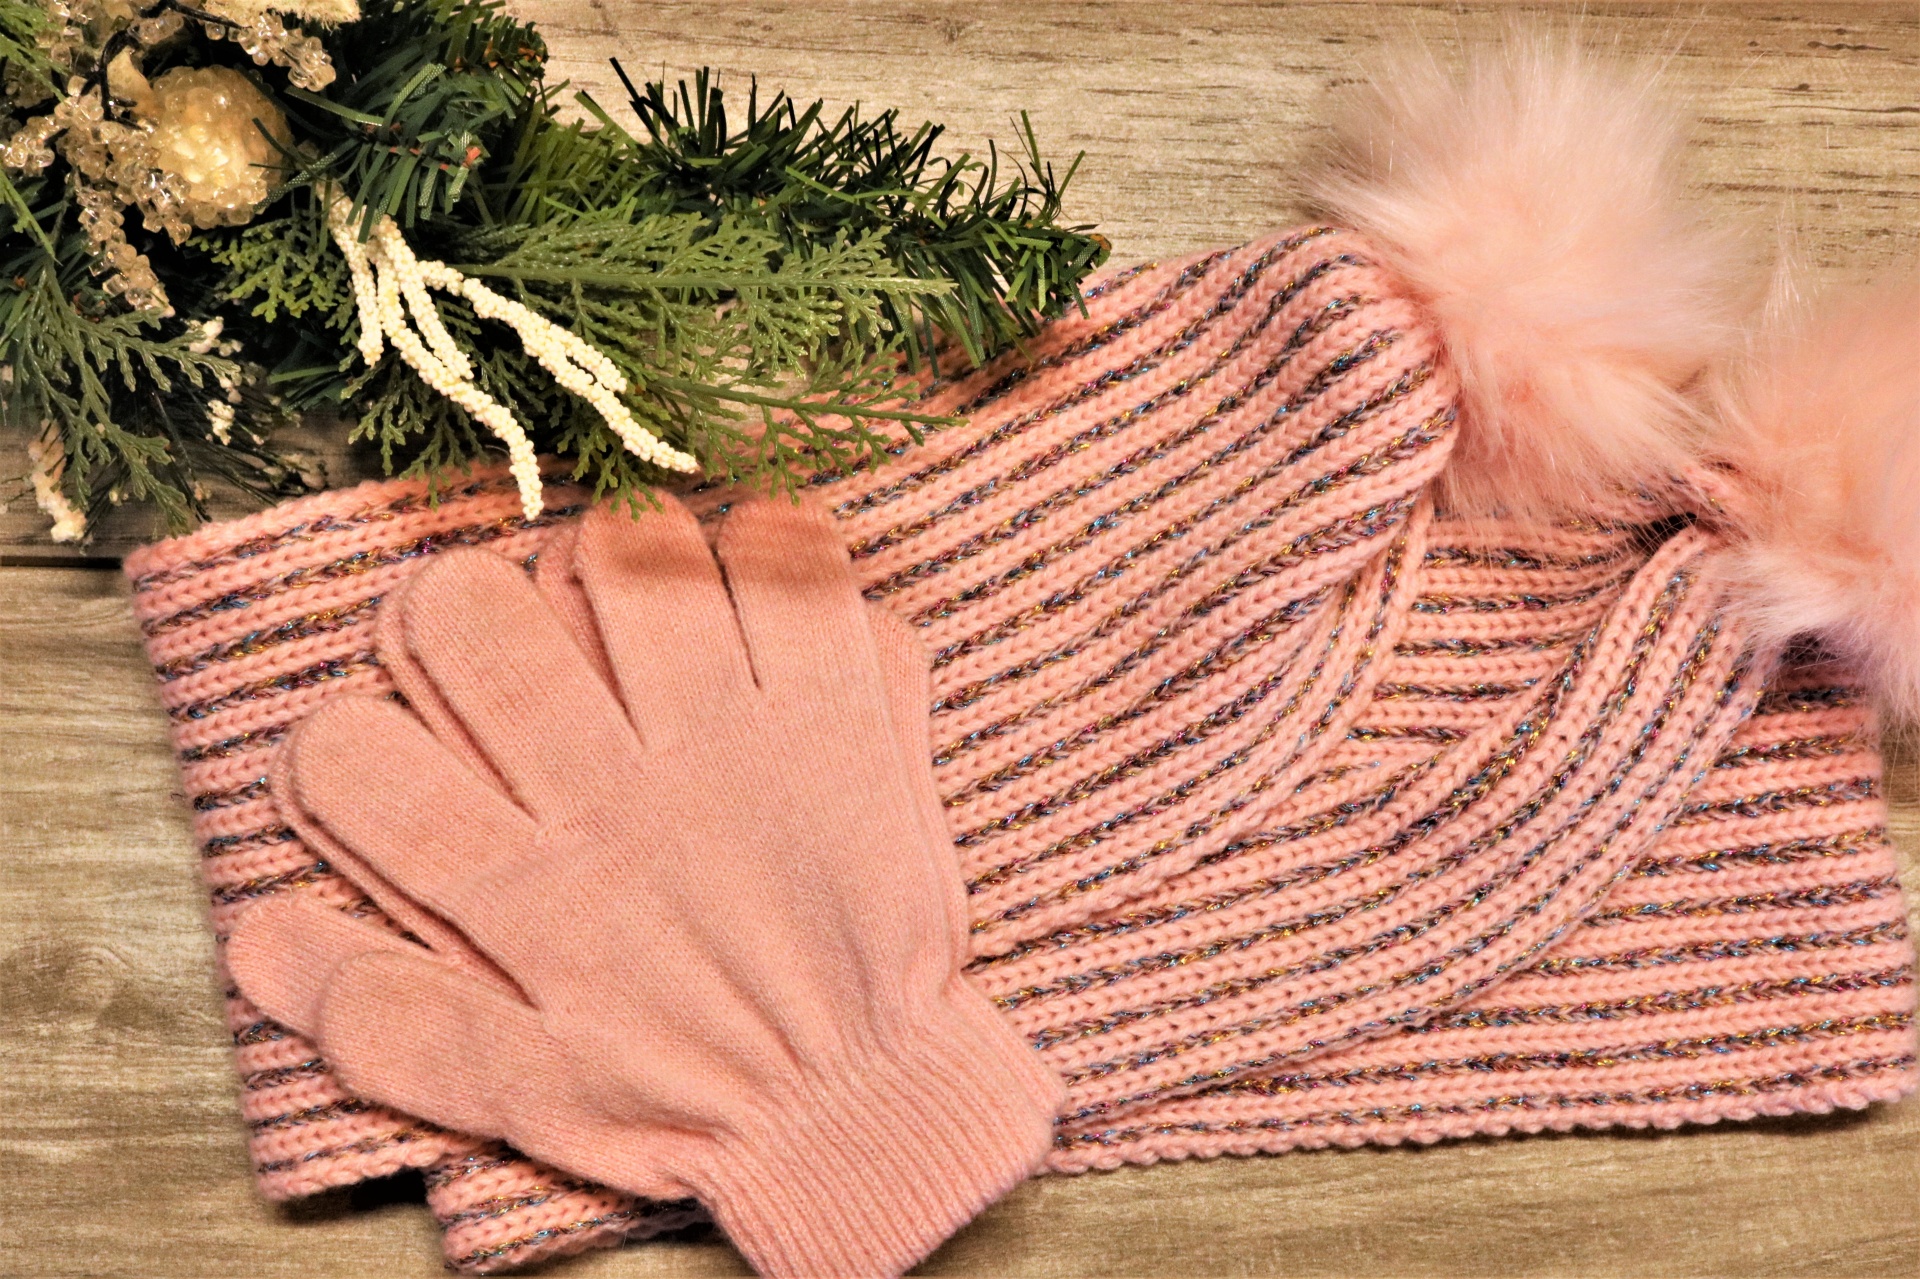 Close-up of a pink winter scarf, with silver stripes and a pair of pink gloves on a wood grain background with a Christmas tree branch in the background.